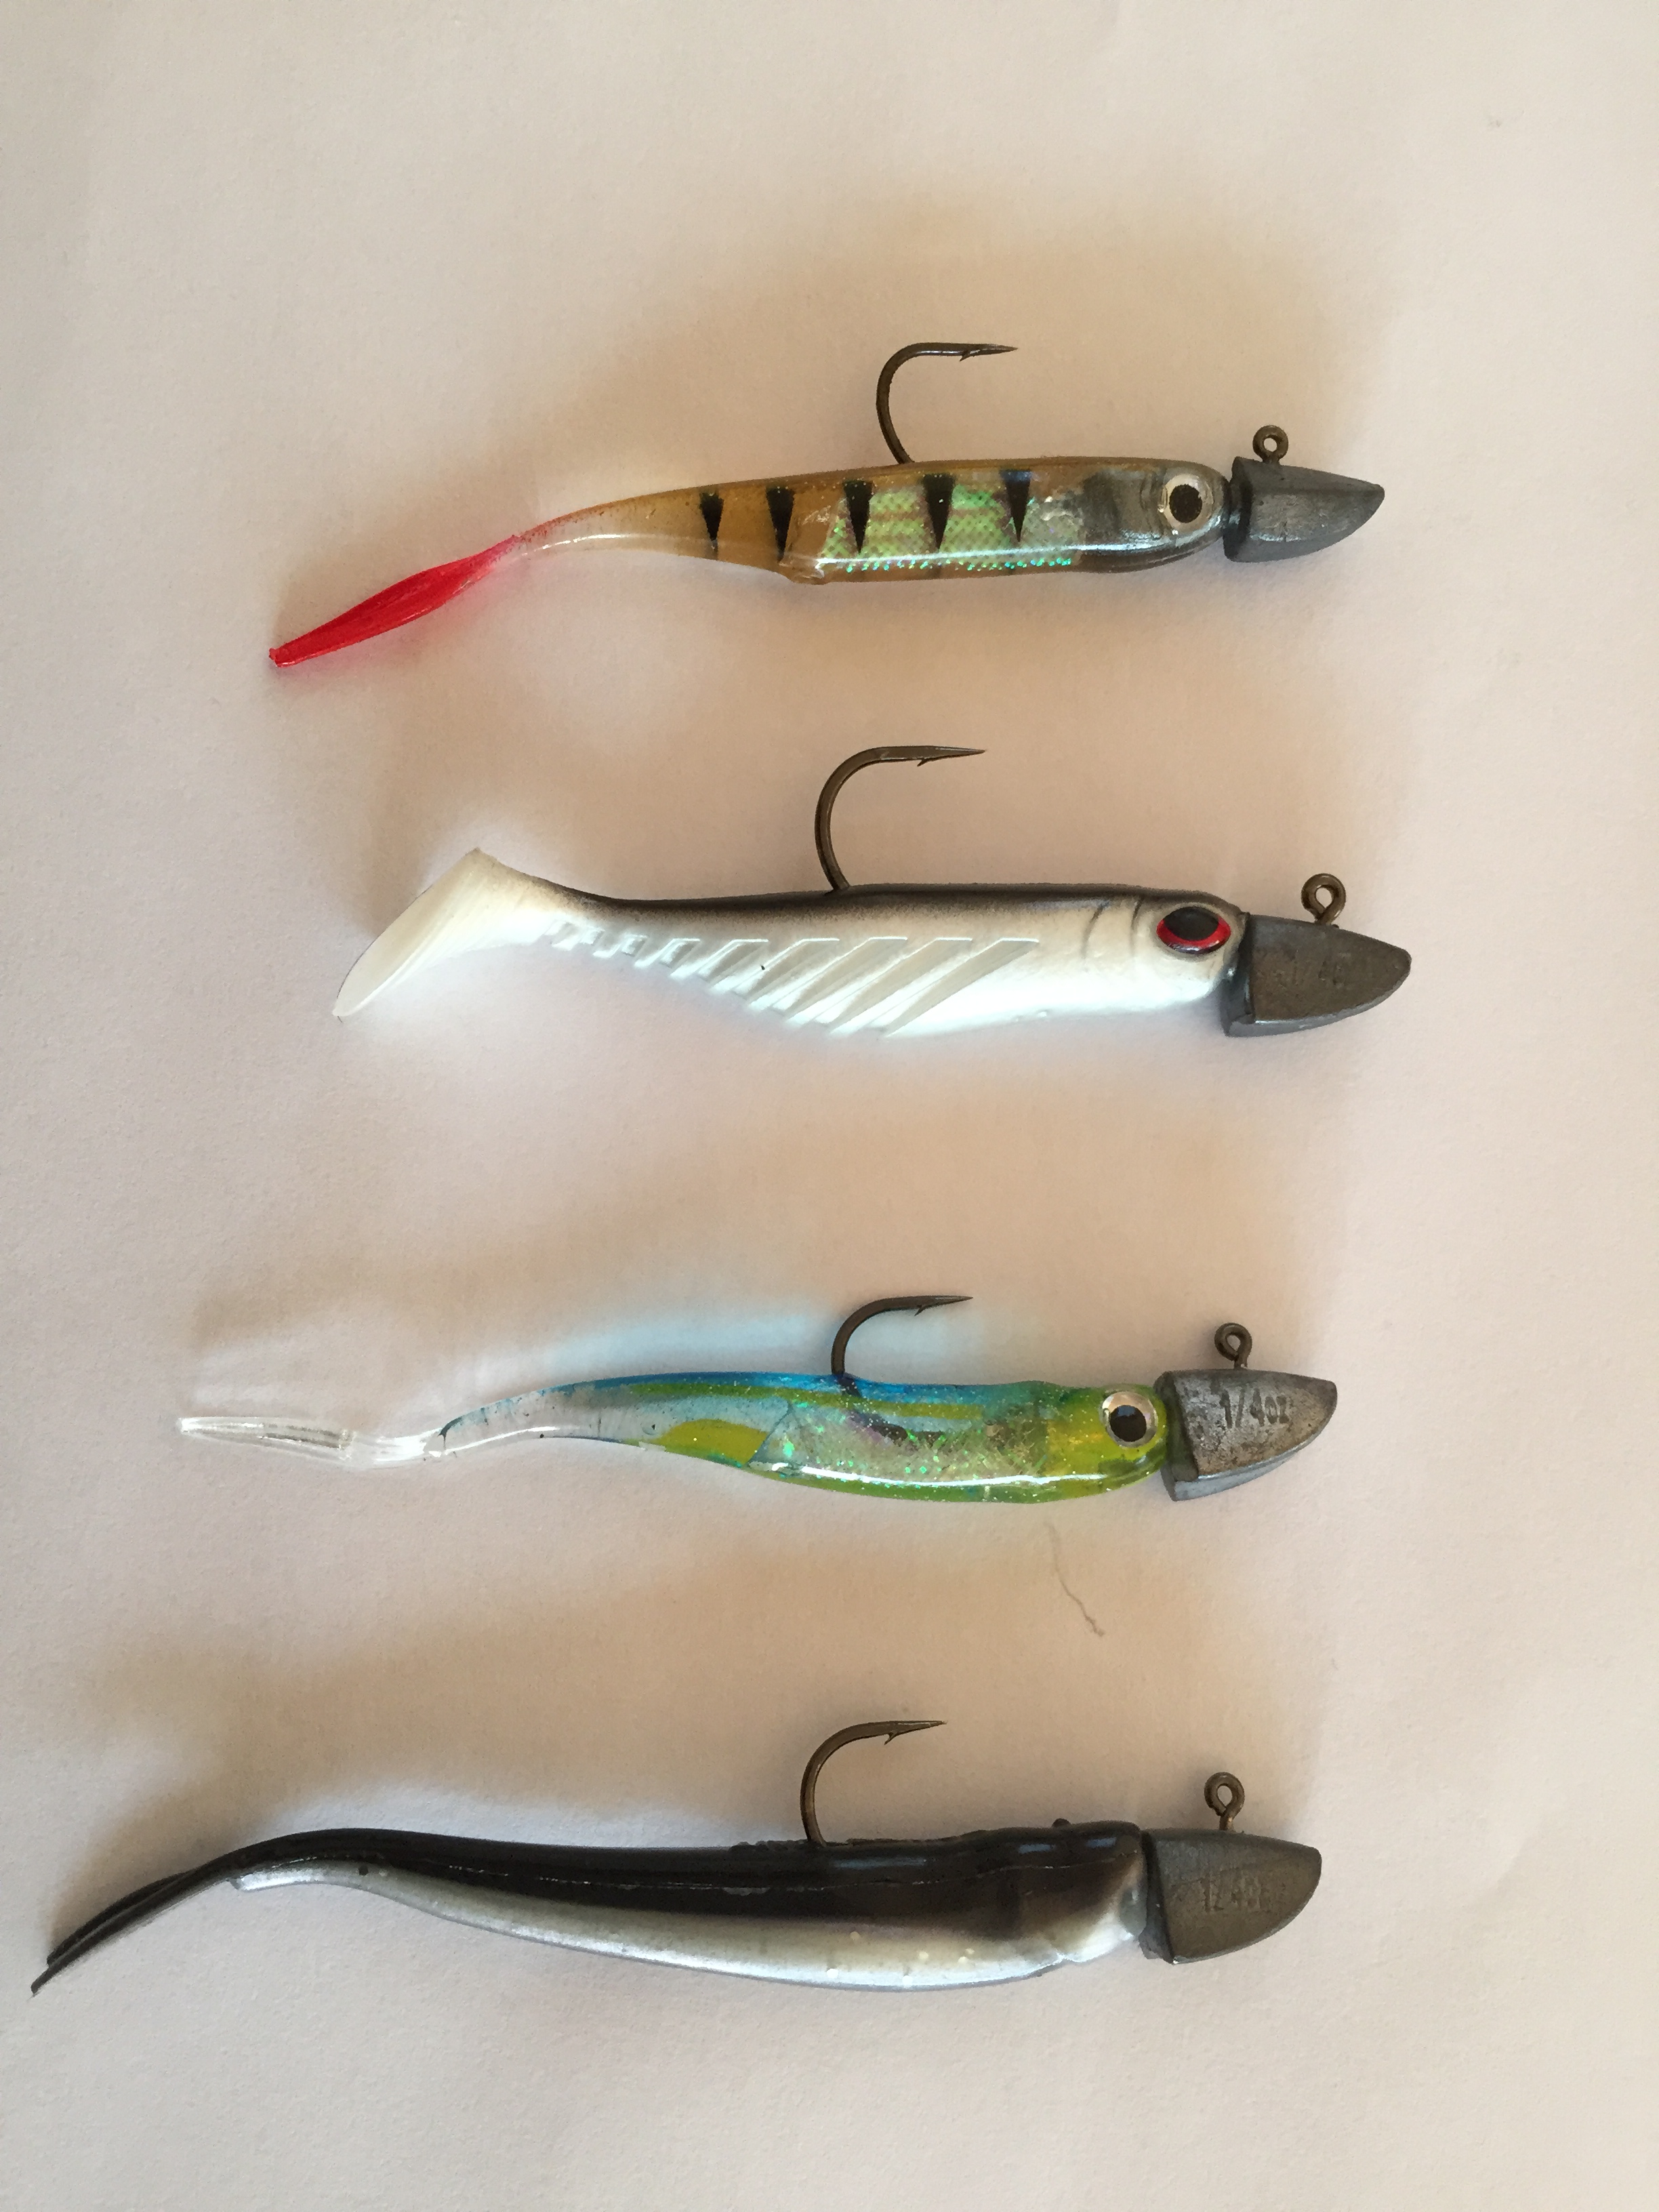 How to Choose the Right Fly Fishing Hook Size